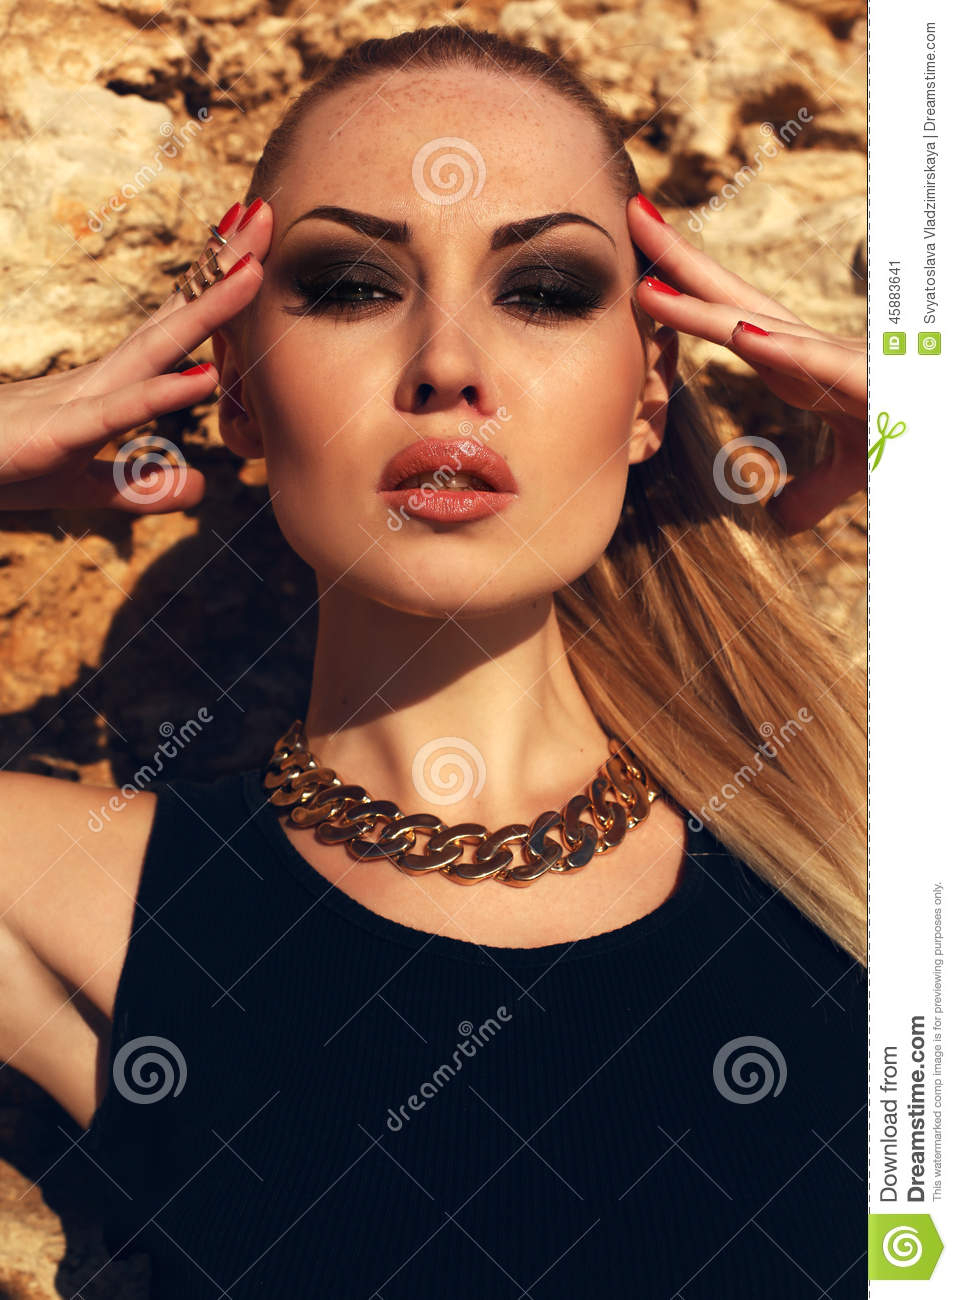 Eye Makeup For Black Dress Portrait Of Girl With Blond Hair With Evening Makeup Stock Image